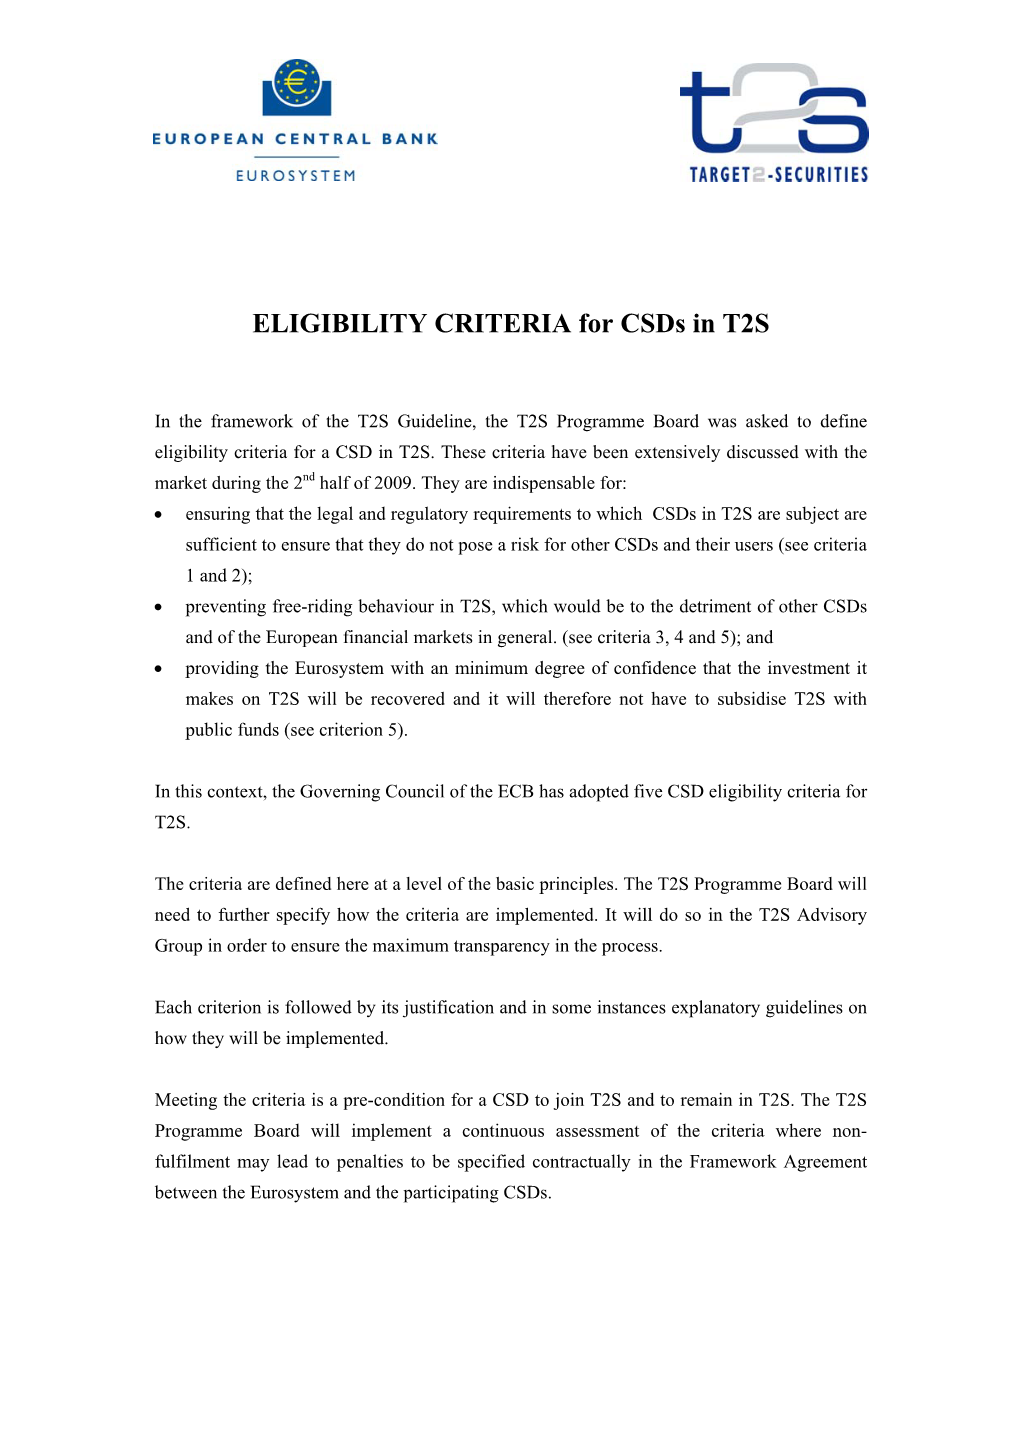 ELIGIBILITY CRITERIA for Csds in T2S